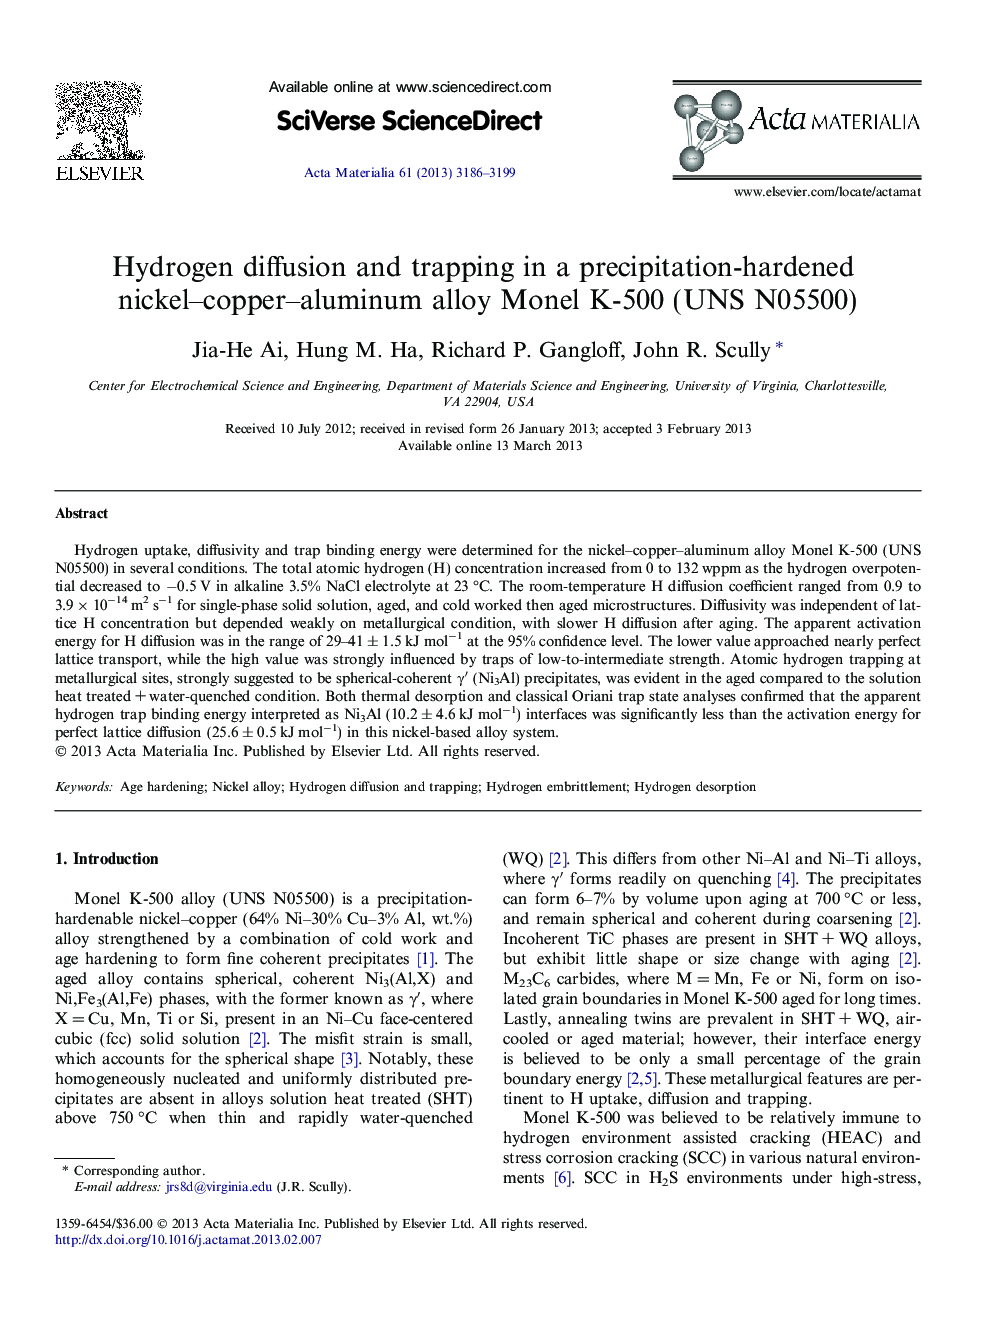 Hydrogen diffusion and trapping in a precipitation-hardened nickel–copper–aluminum alloy Monel K-500 (UNS N05500)